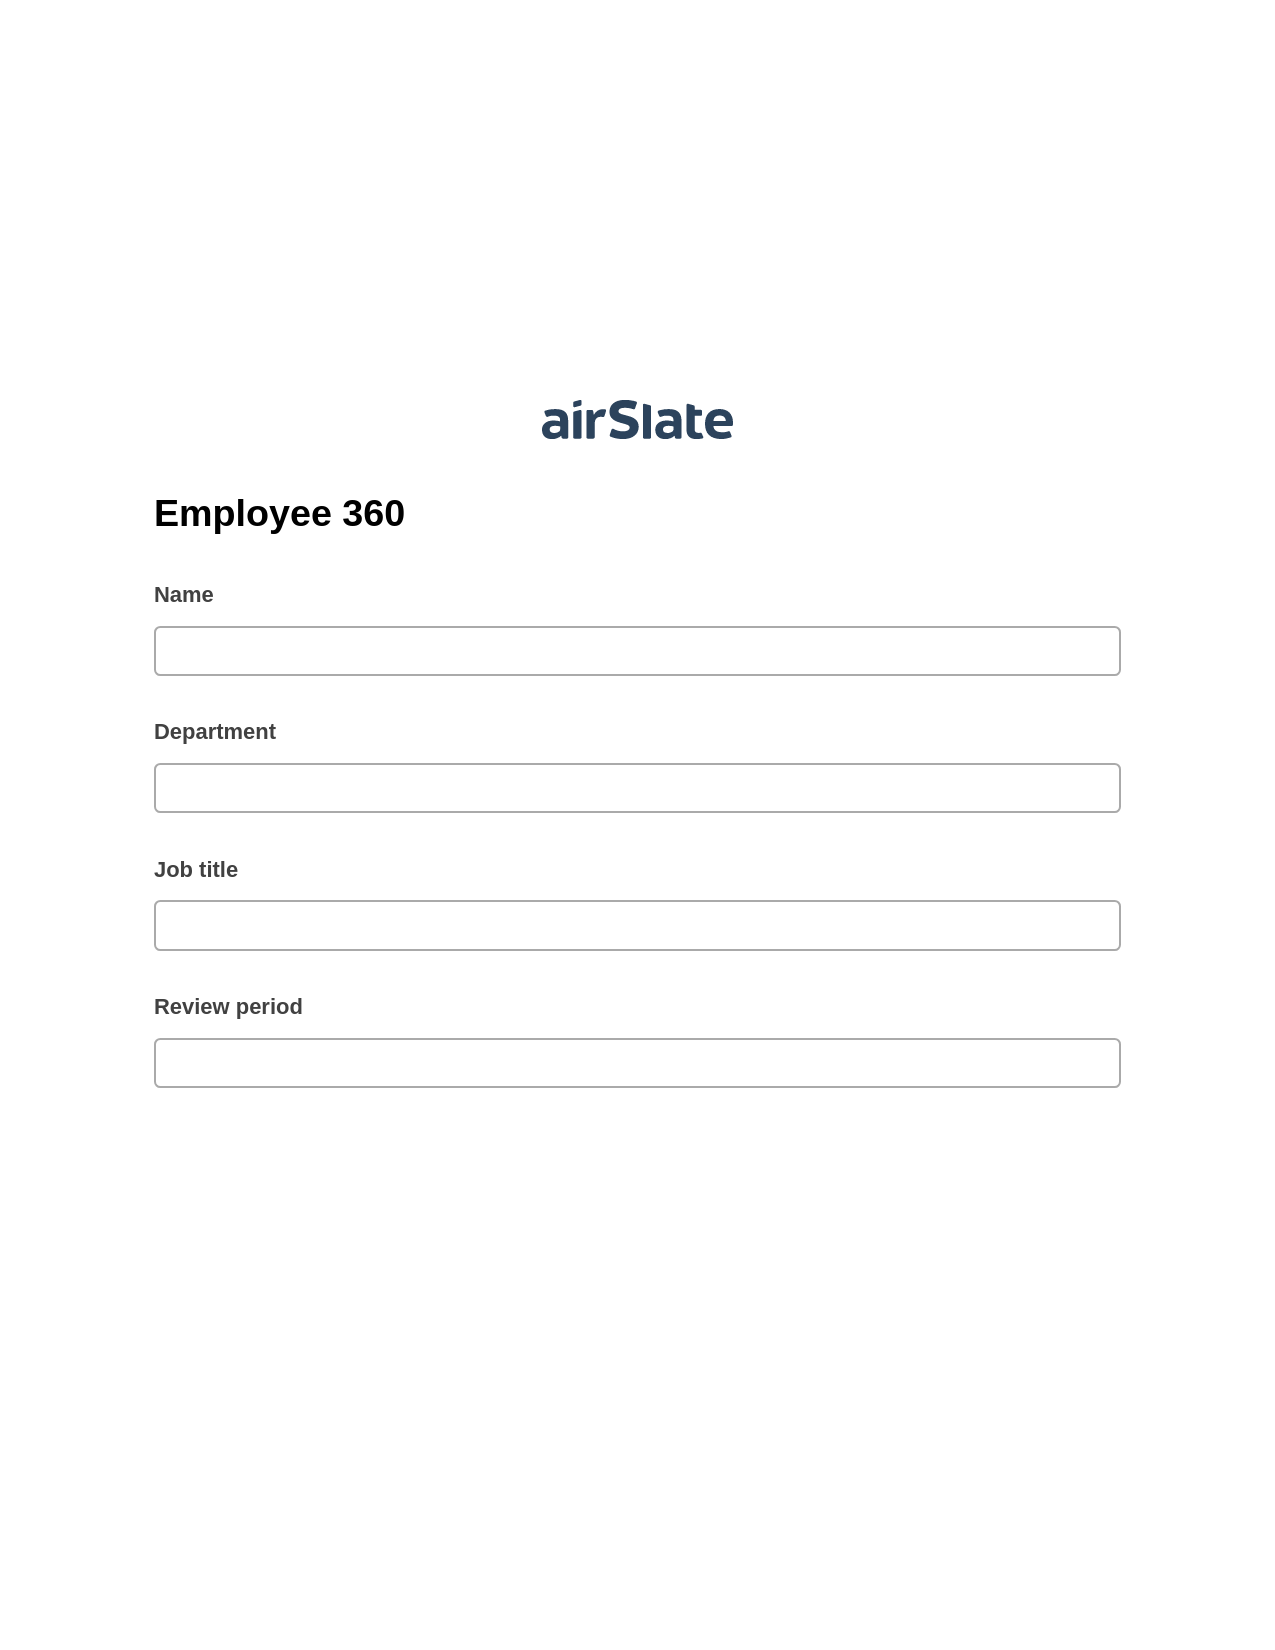 Multirole Employee 360 Pre-fill from MySQL Bot, Create MS Dynamics 365 Records Bot, Export to Smartsheet